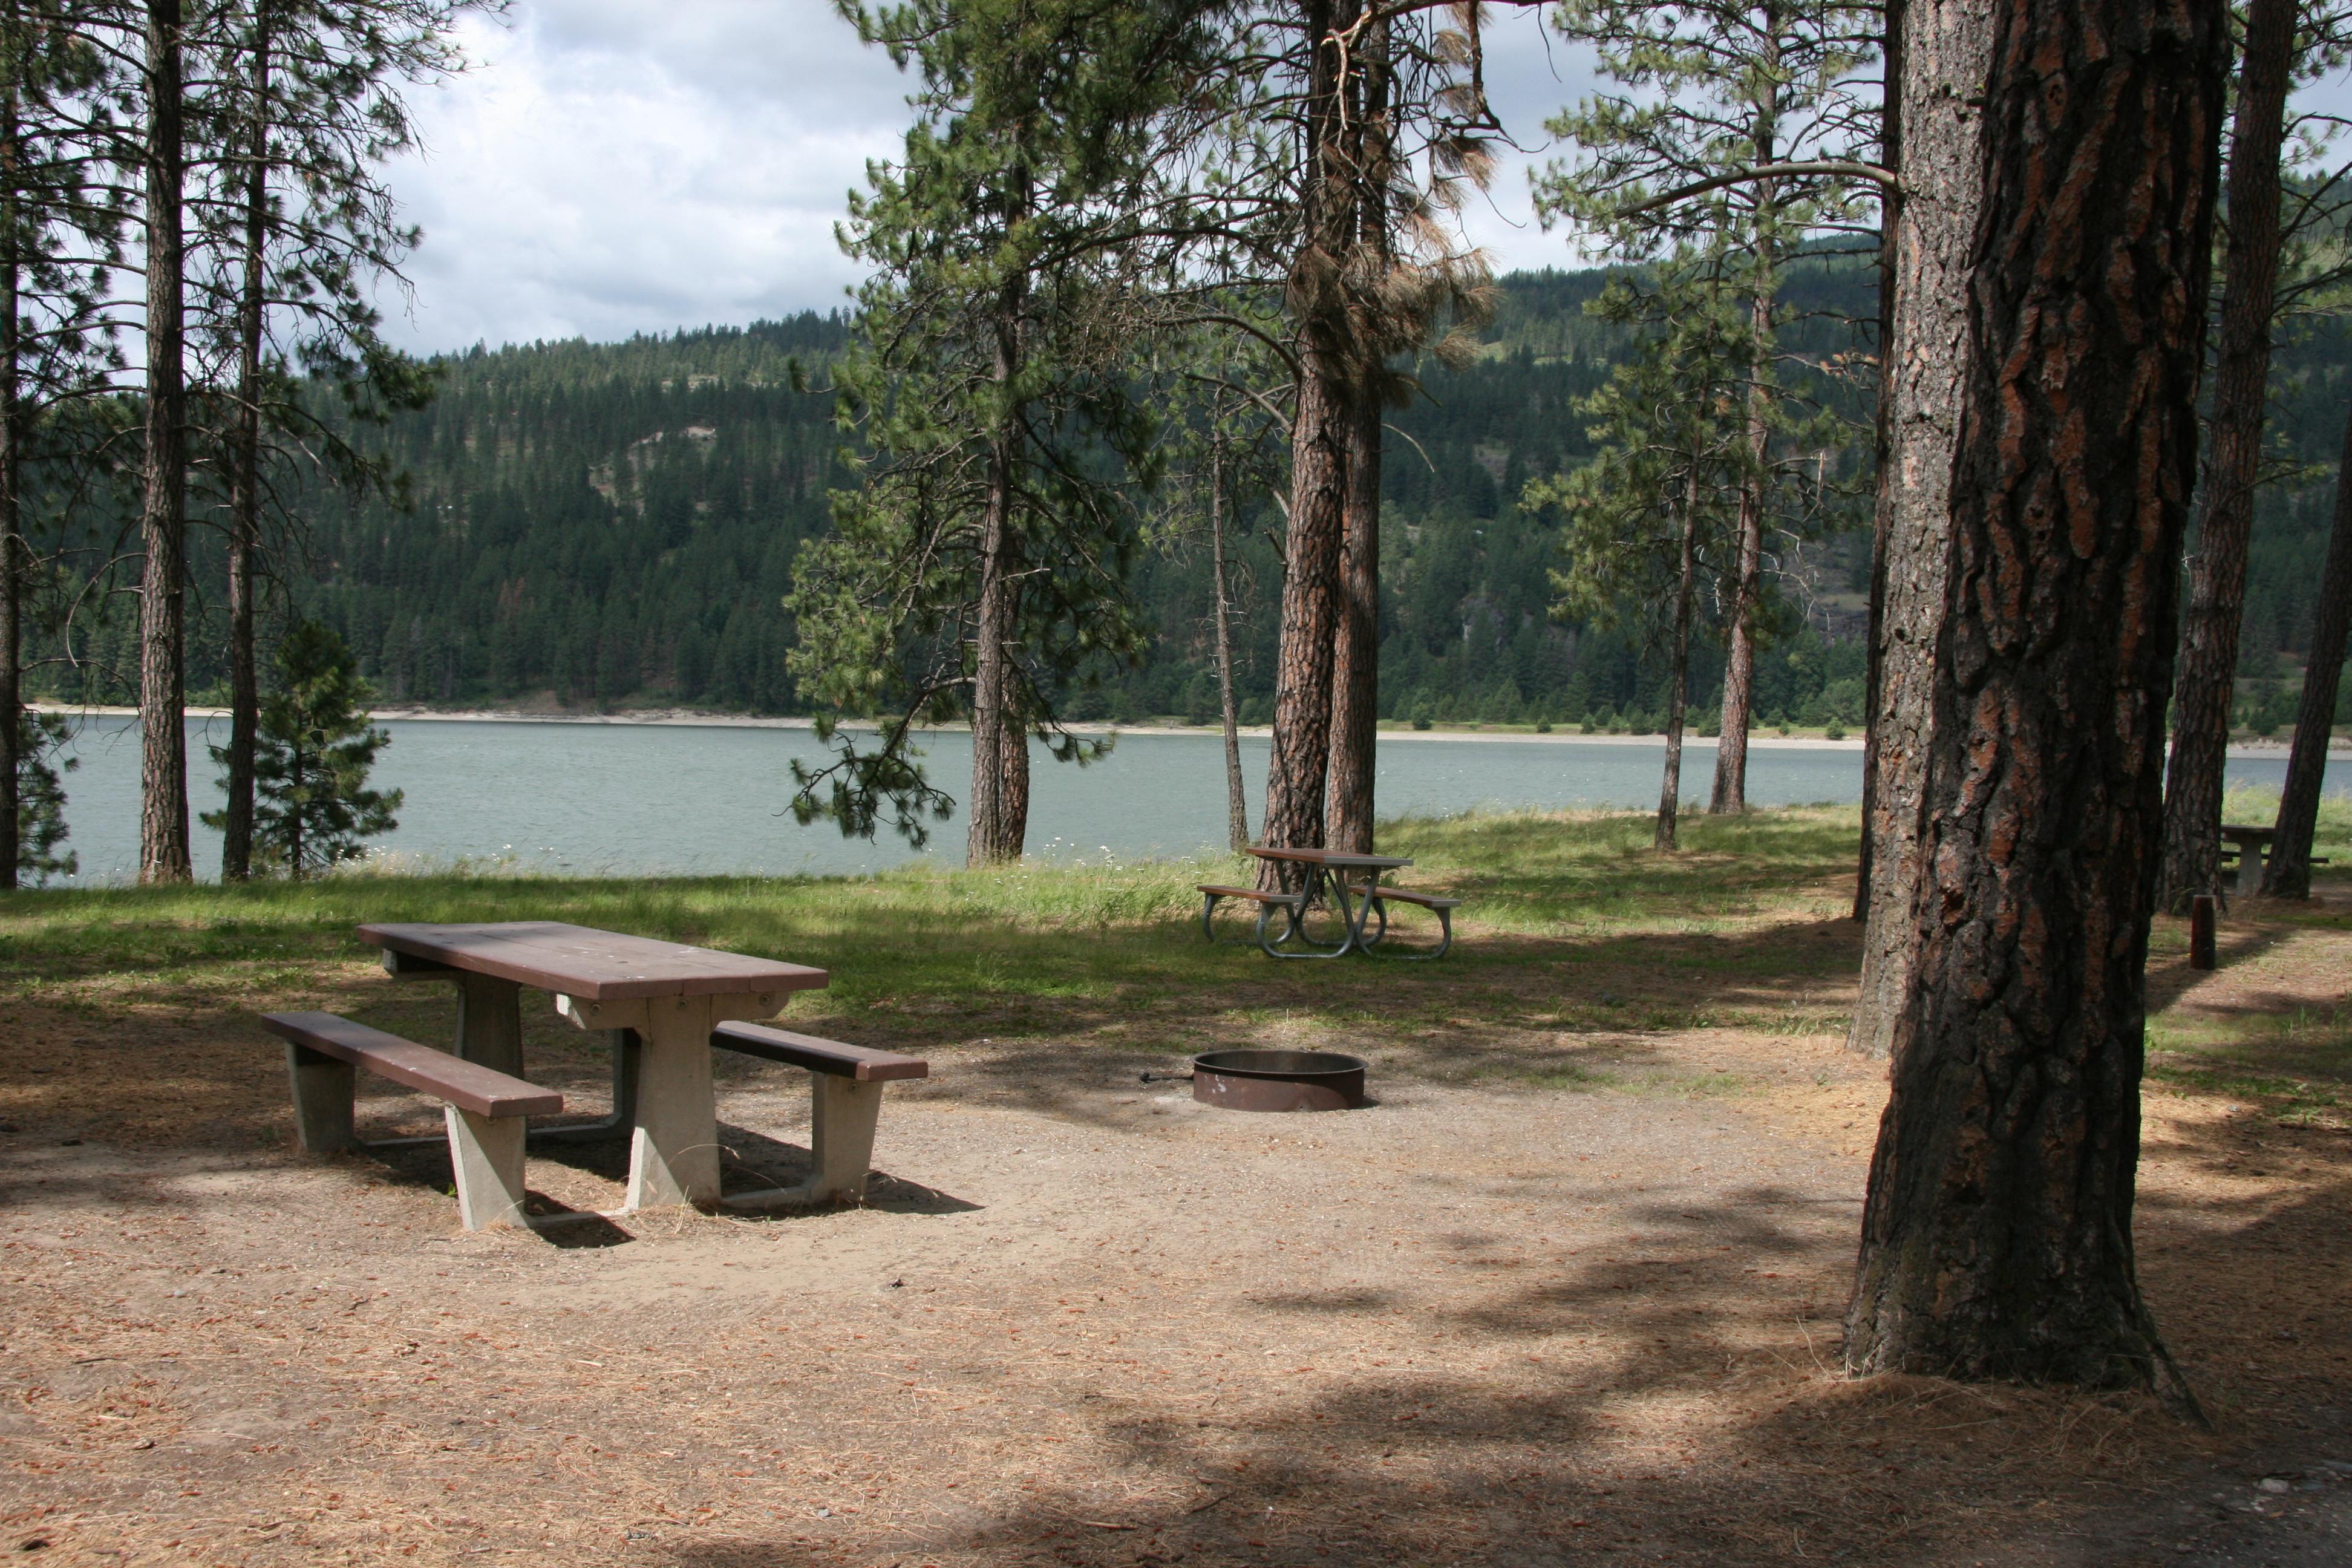 Two picnic tables and a fire ring visible at campsites in the pines, adjacent to the lake shore.